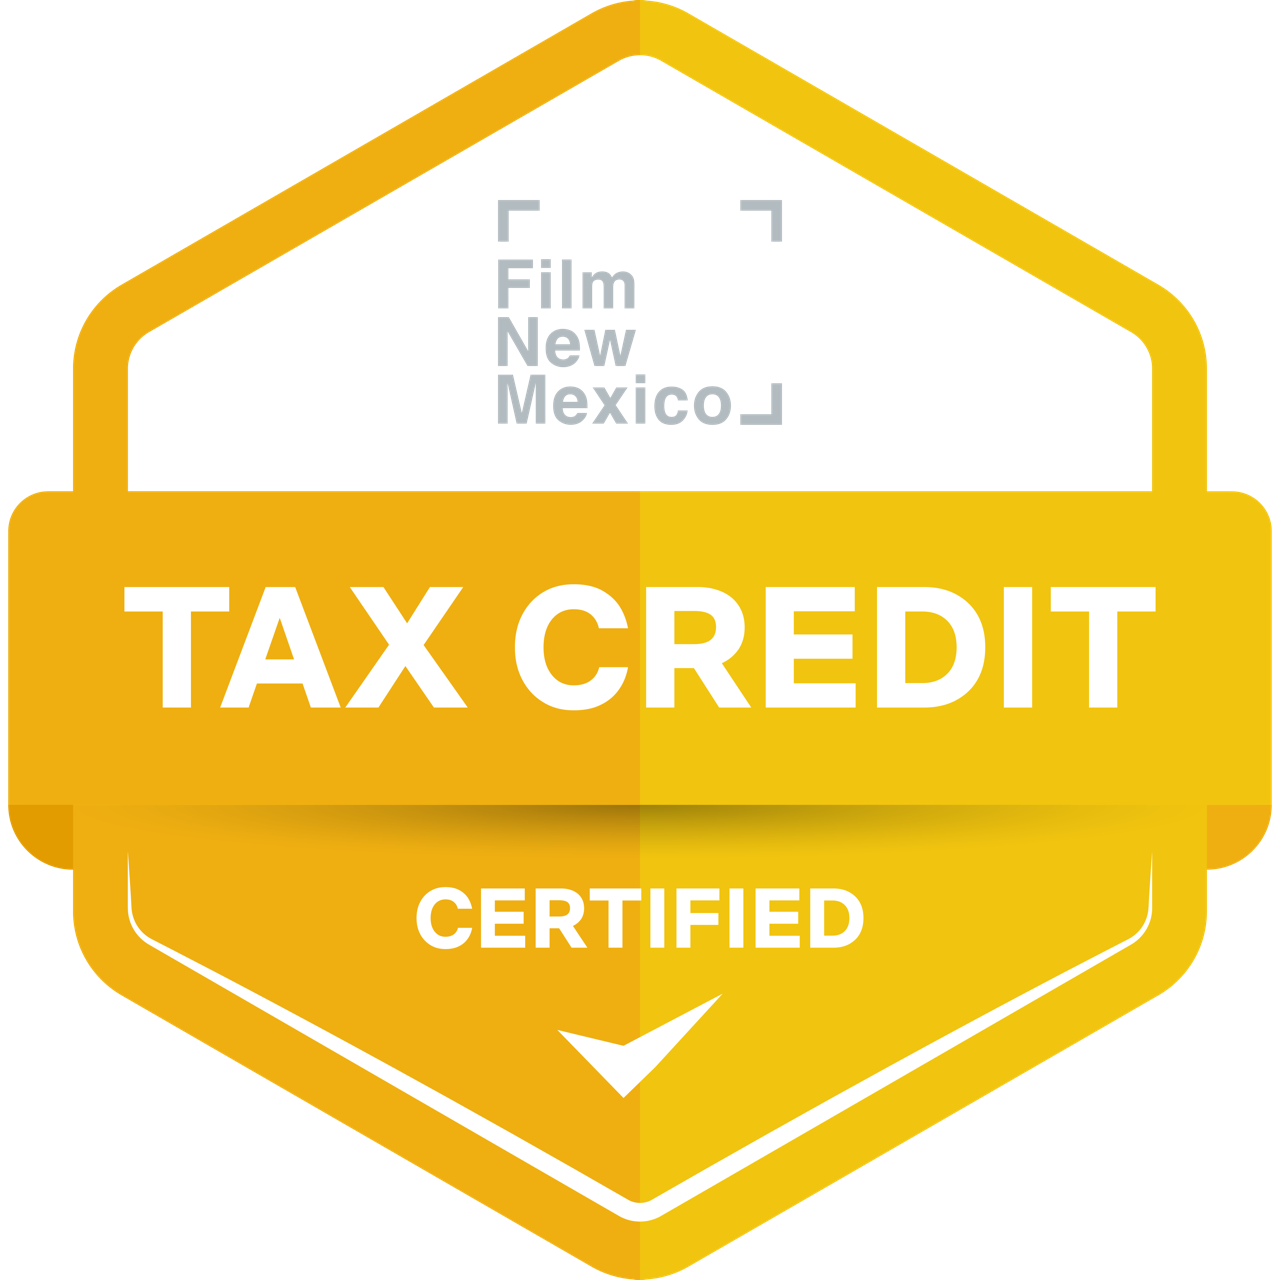 Tax Credit Certified Graphic